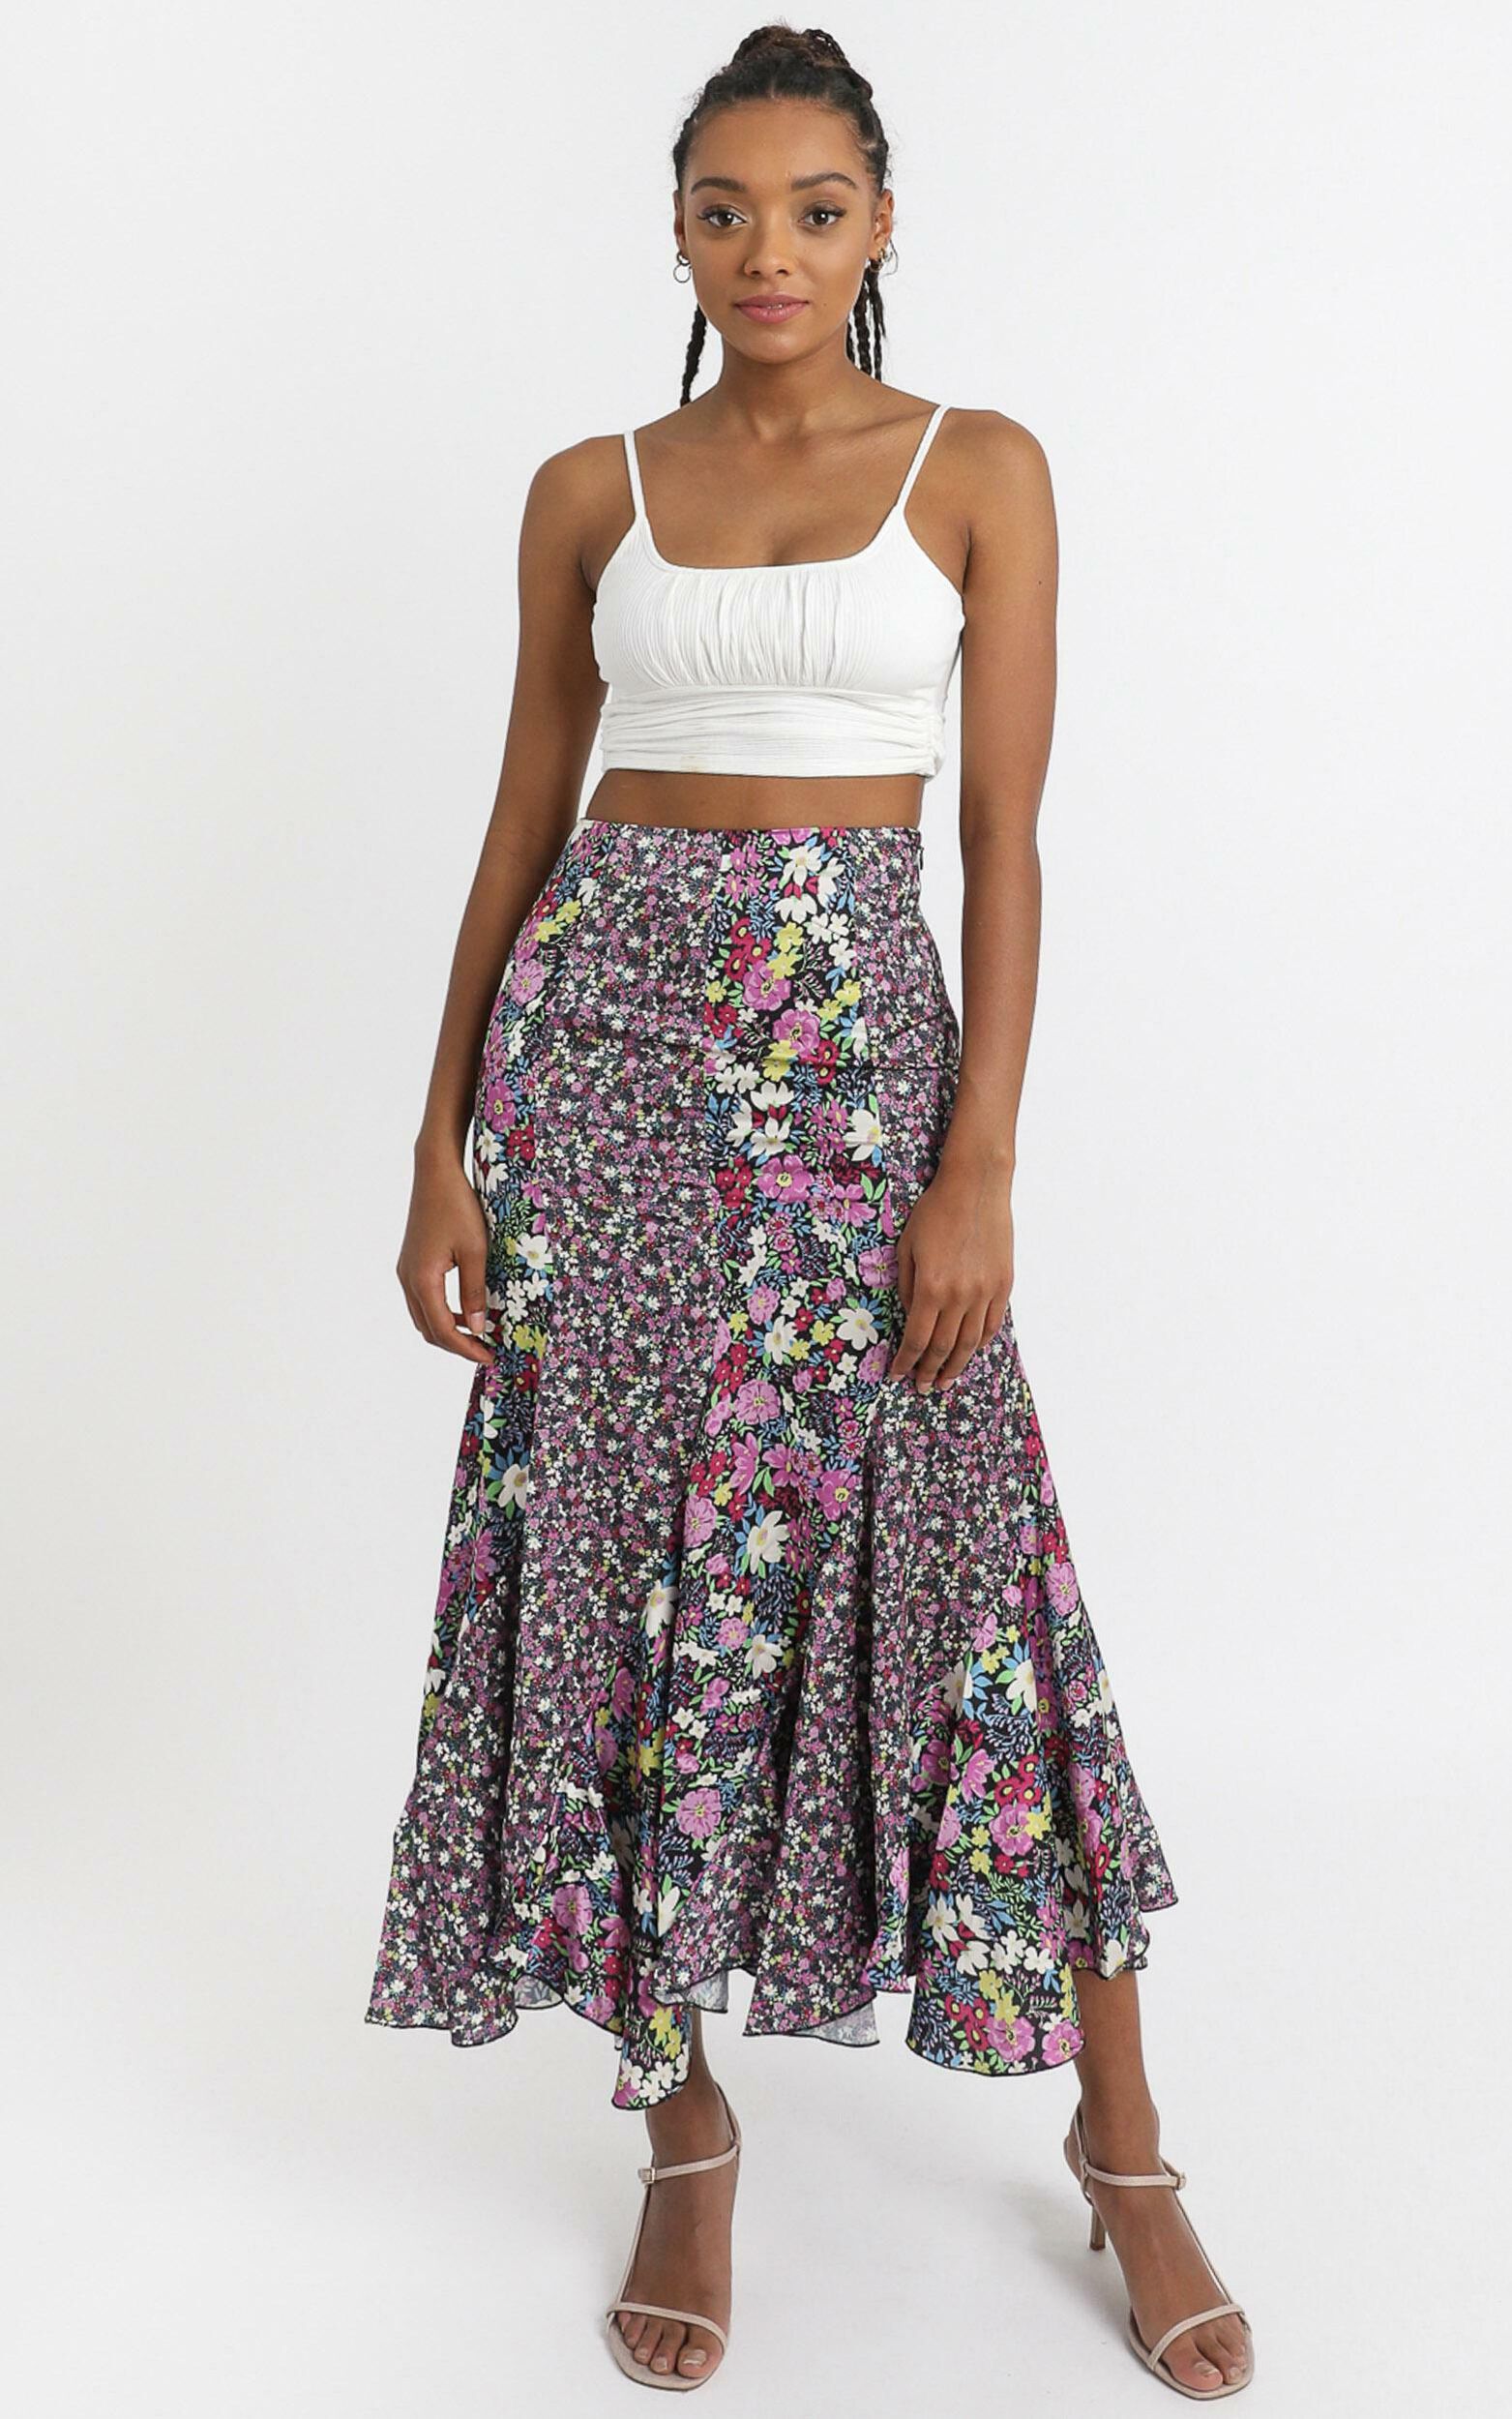 A Fool For You Skirt in Forest Floral | Showpo